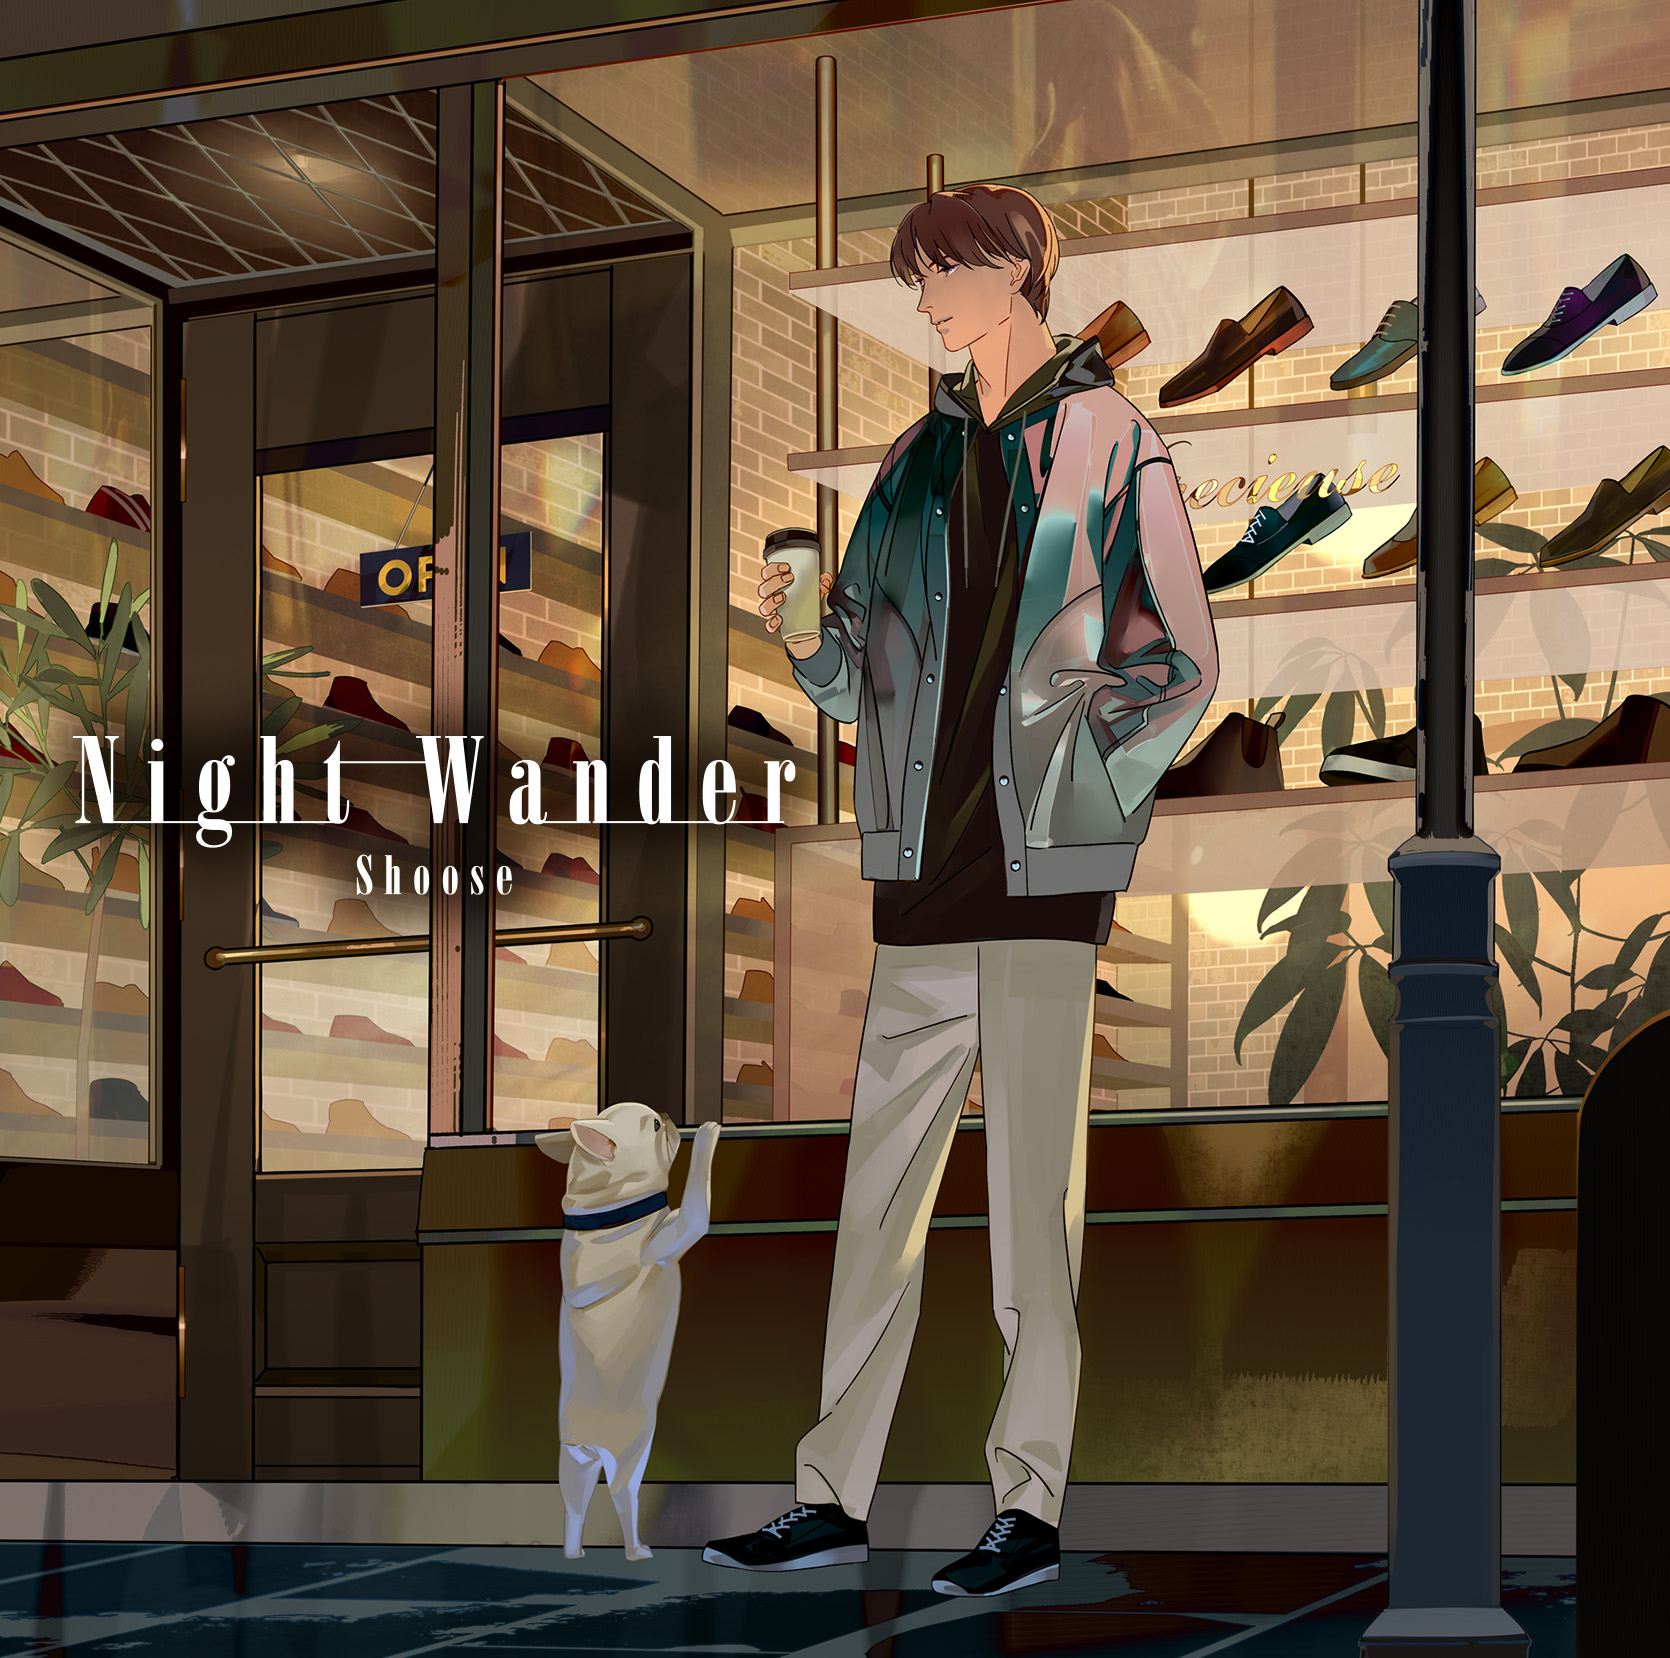 Shoose "Night Wander" Normal Version(CD Only)Release on January 5th 2022 No.1